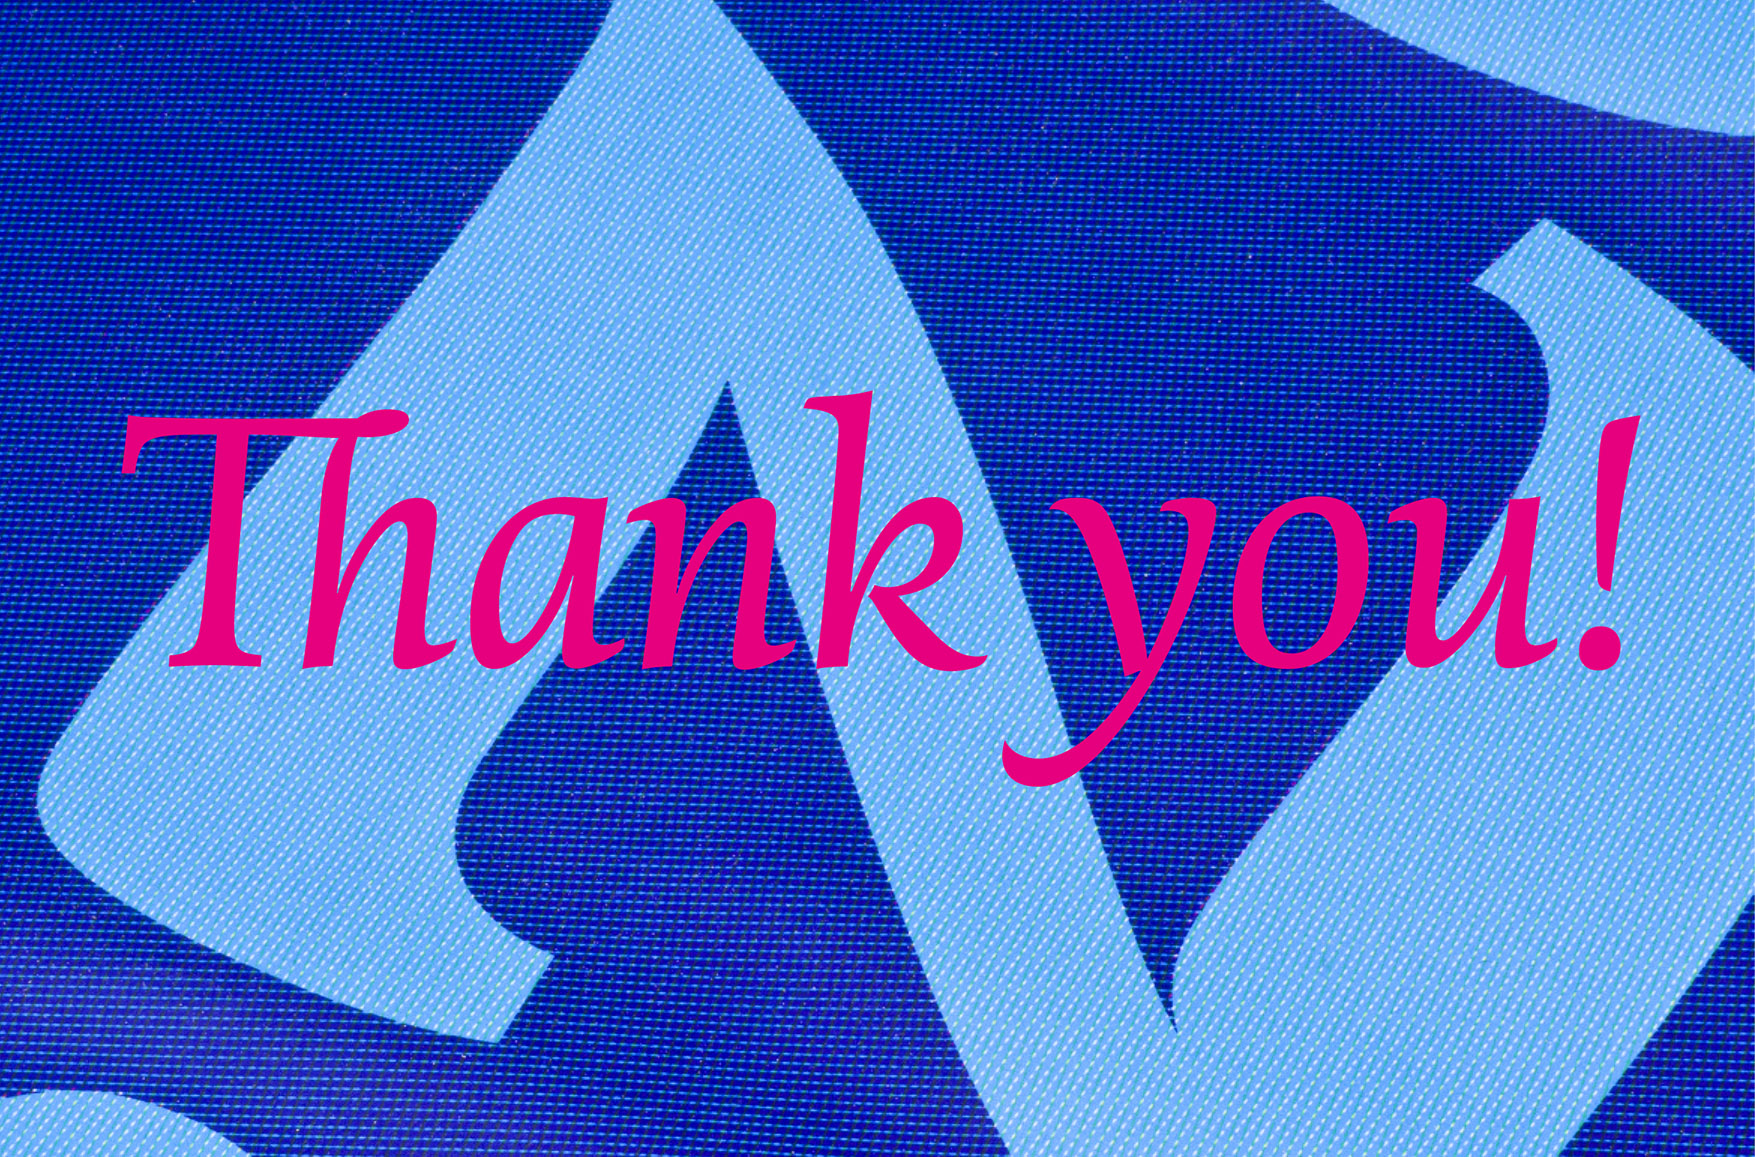 "Thank you!" in red digital lettering on blue graphic background by Elmo van Slingerland